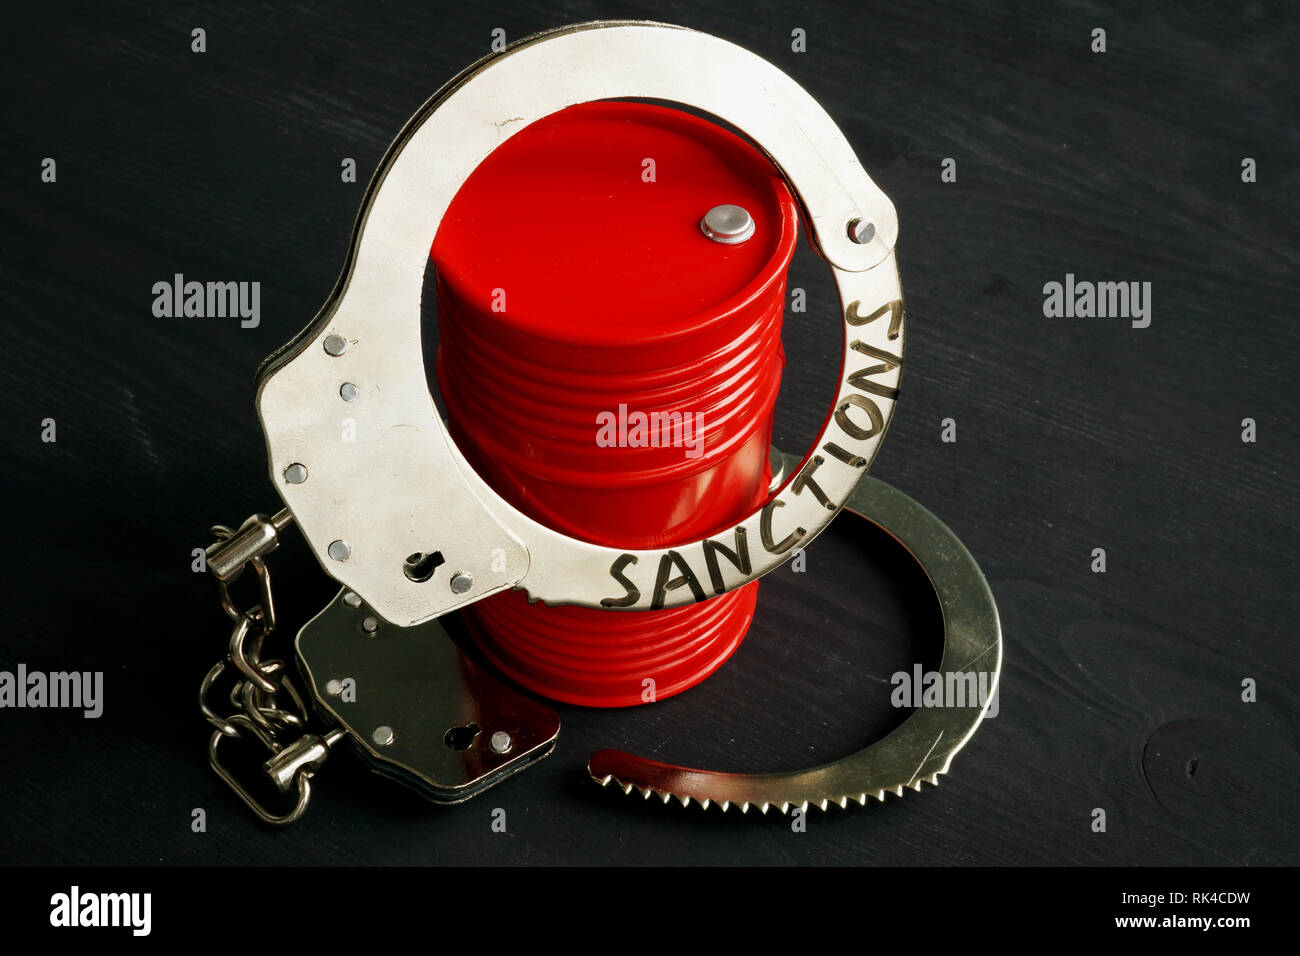 Trade embargo and sanctions concept. Barrel of oil and handcuffs. Stock Photo